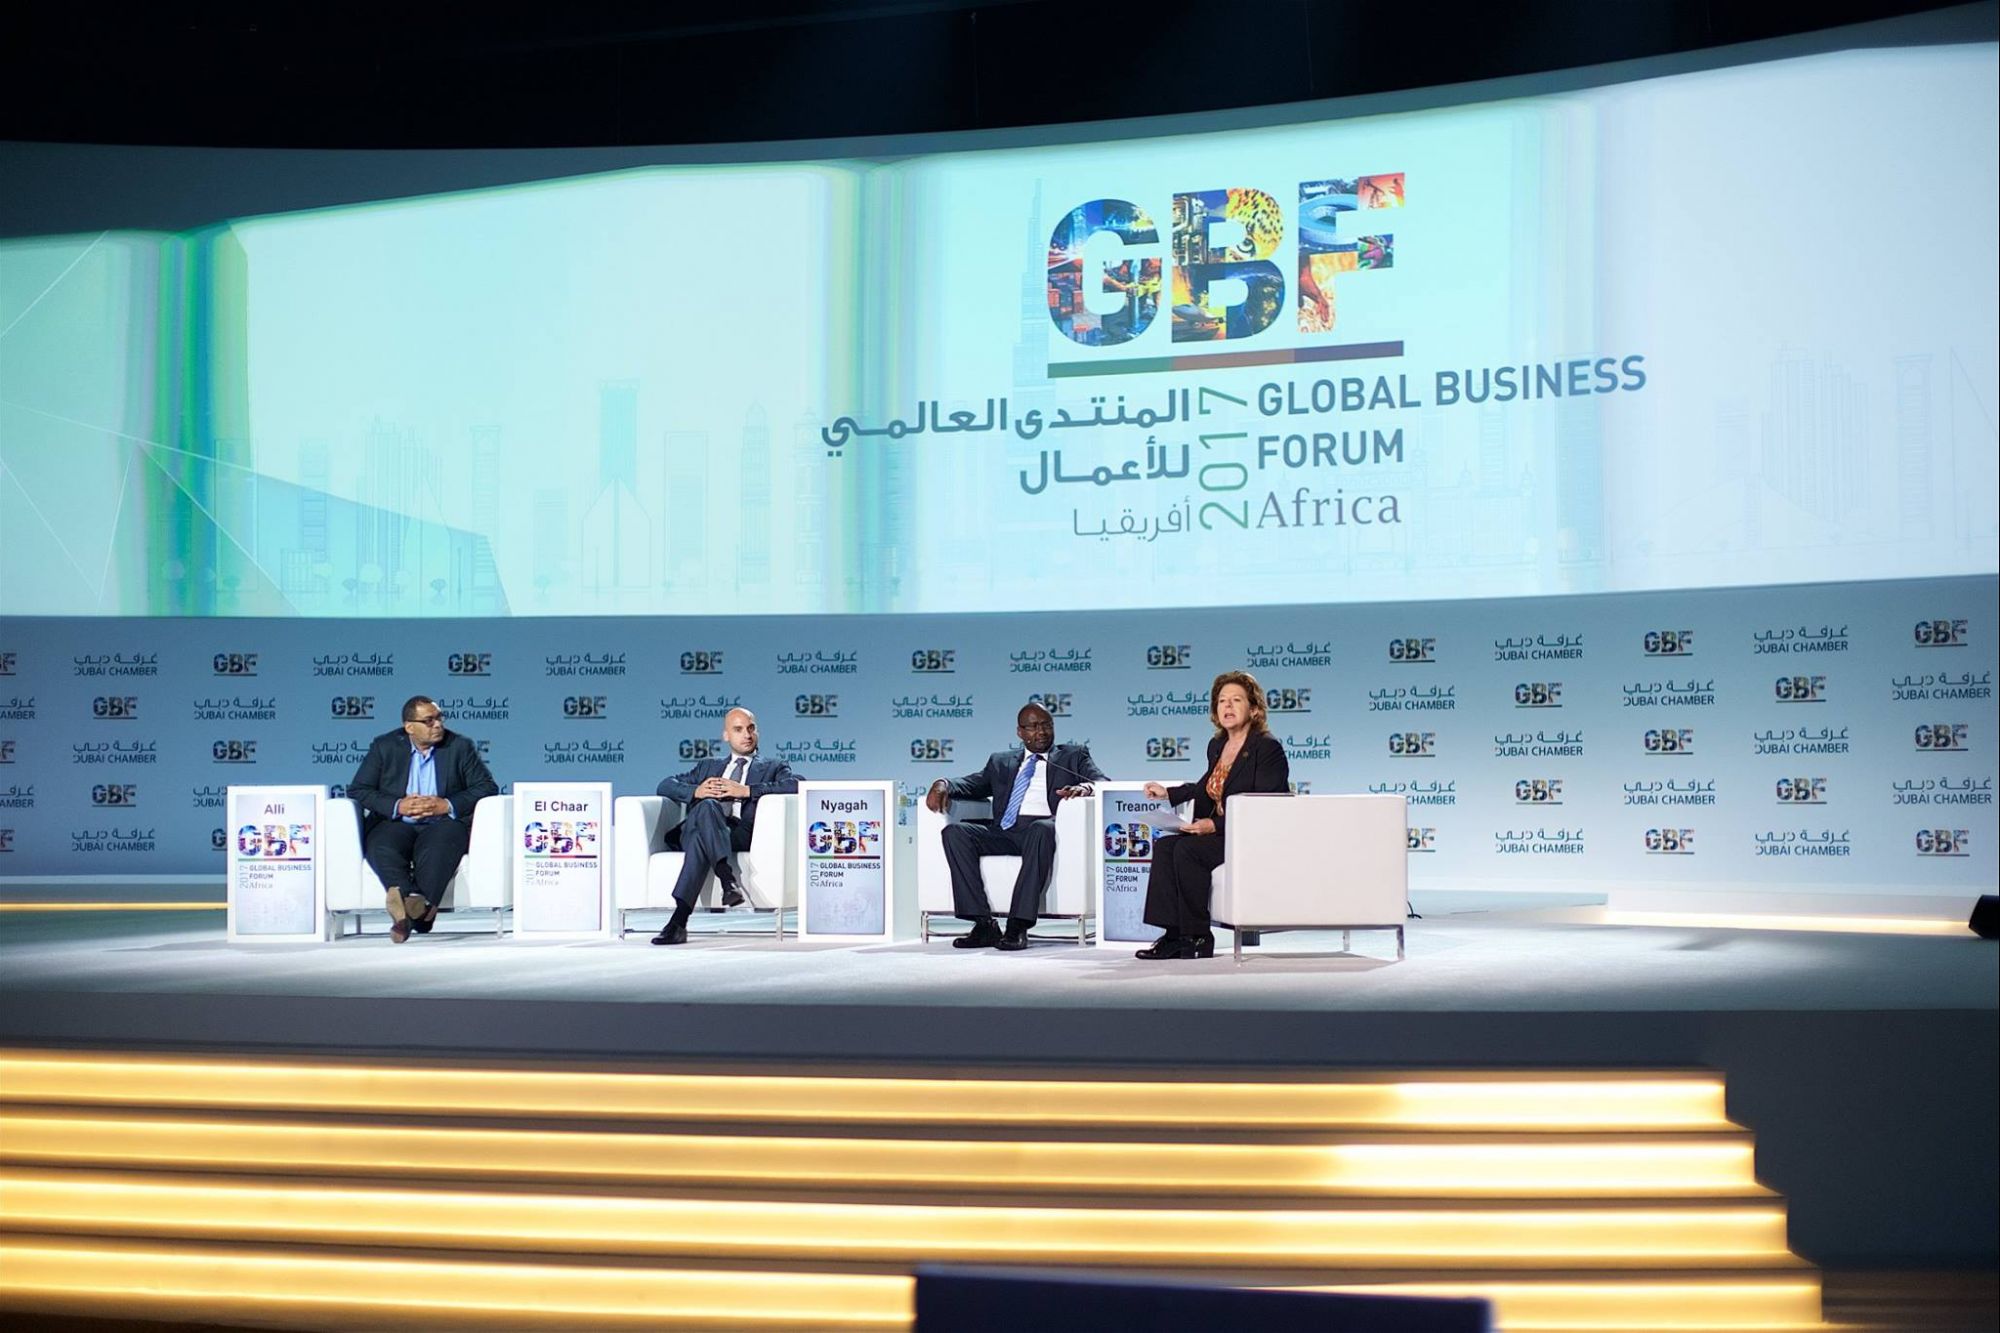 "Scale-Up Africa" To Be Theme Of Dubai Chamber's Fifth Global Business Forum Africa In November 2019